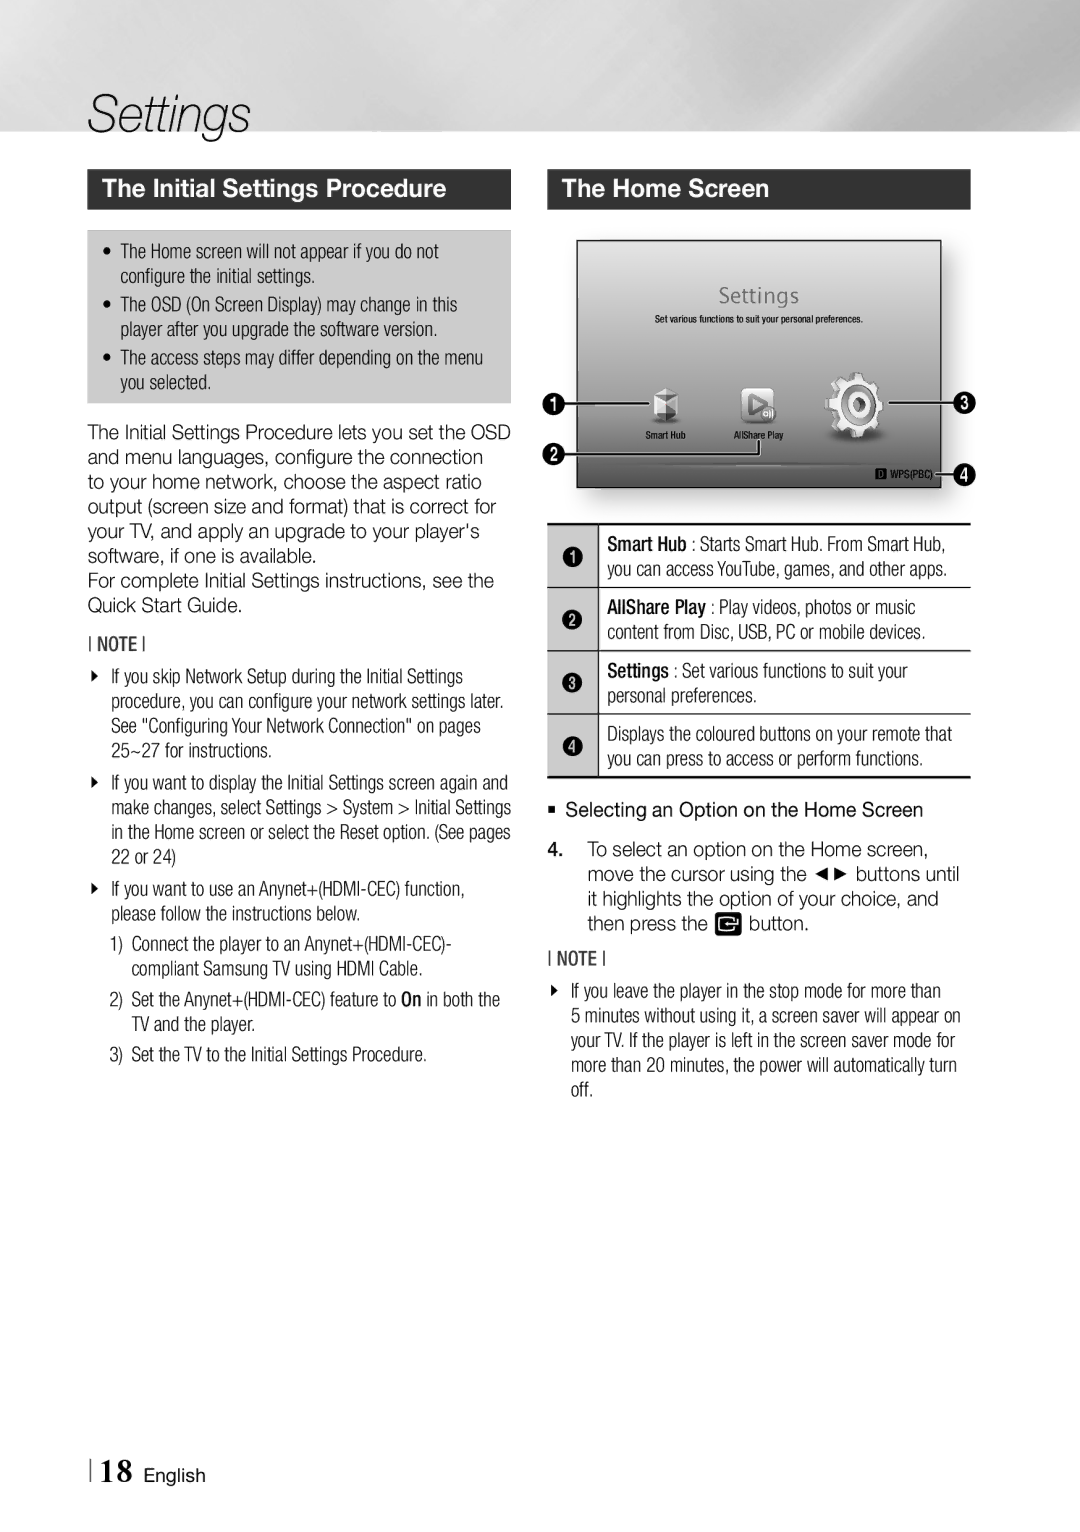 Samsung BD-ES6000 Initial Settings Procedure, Home Screen, Access steps may differ depending on the menu you selected 